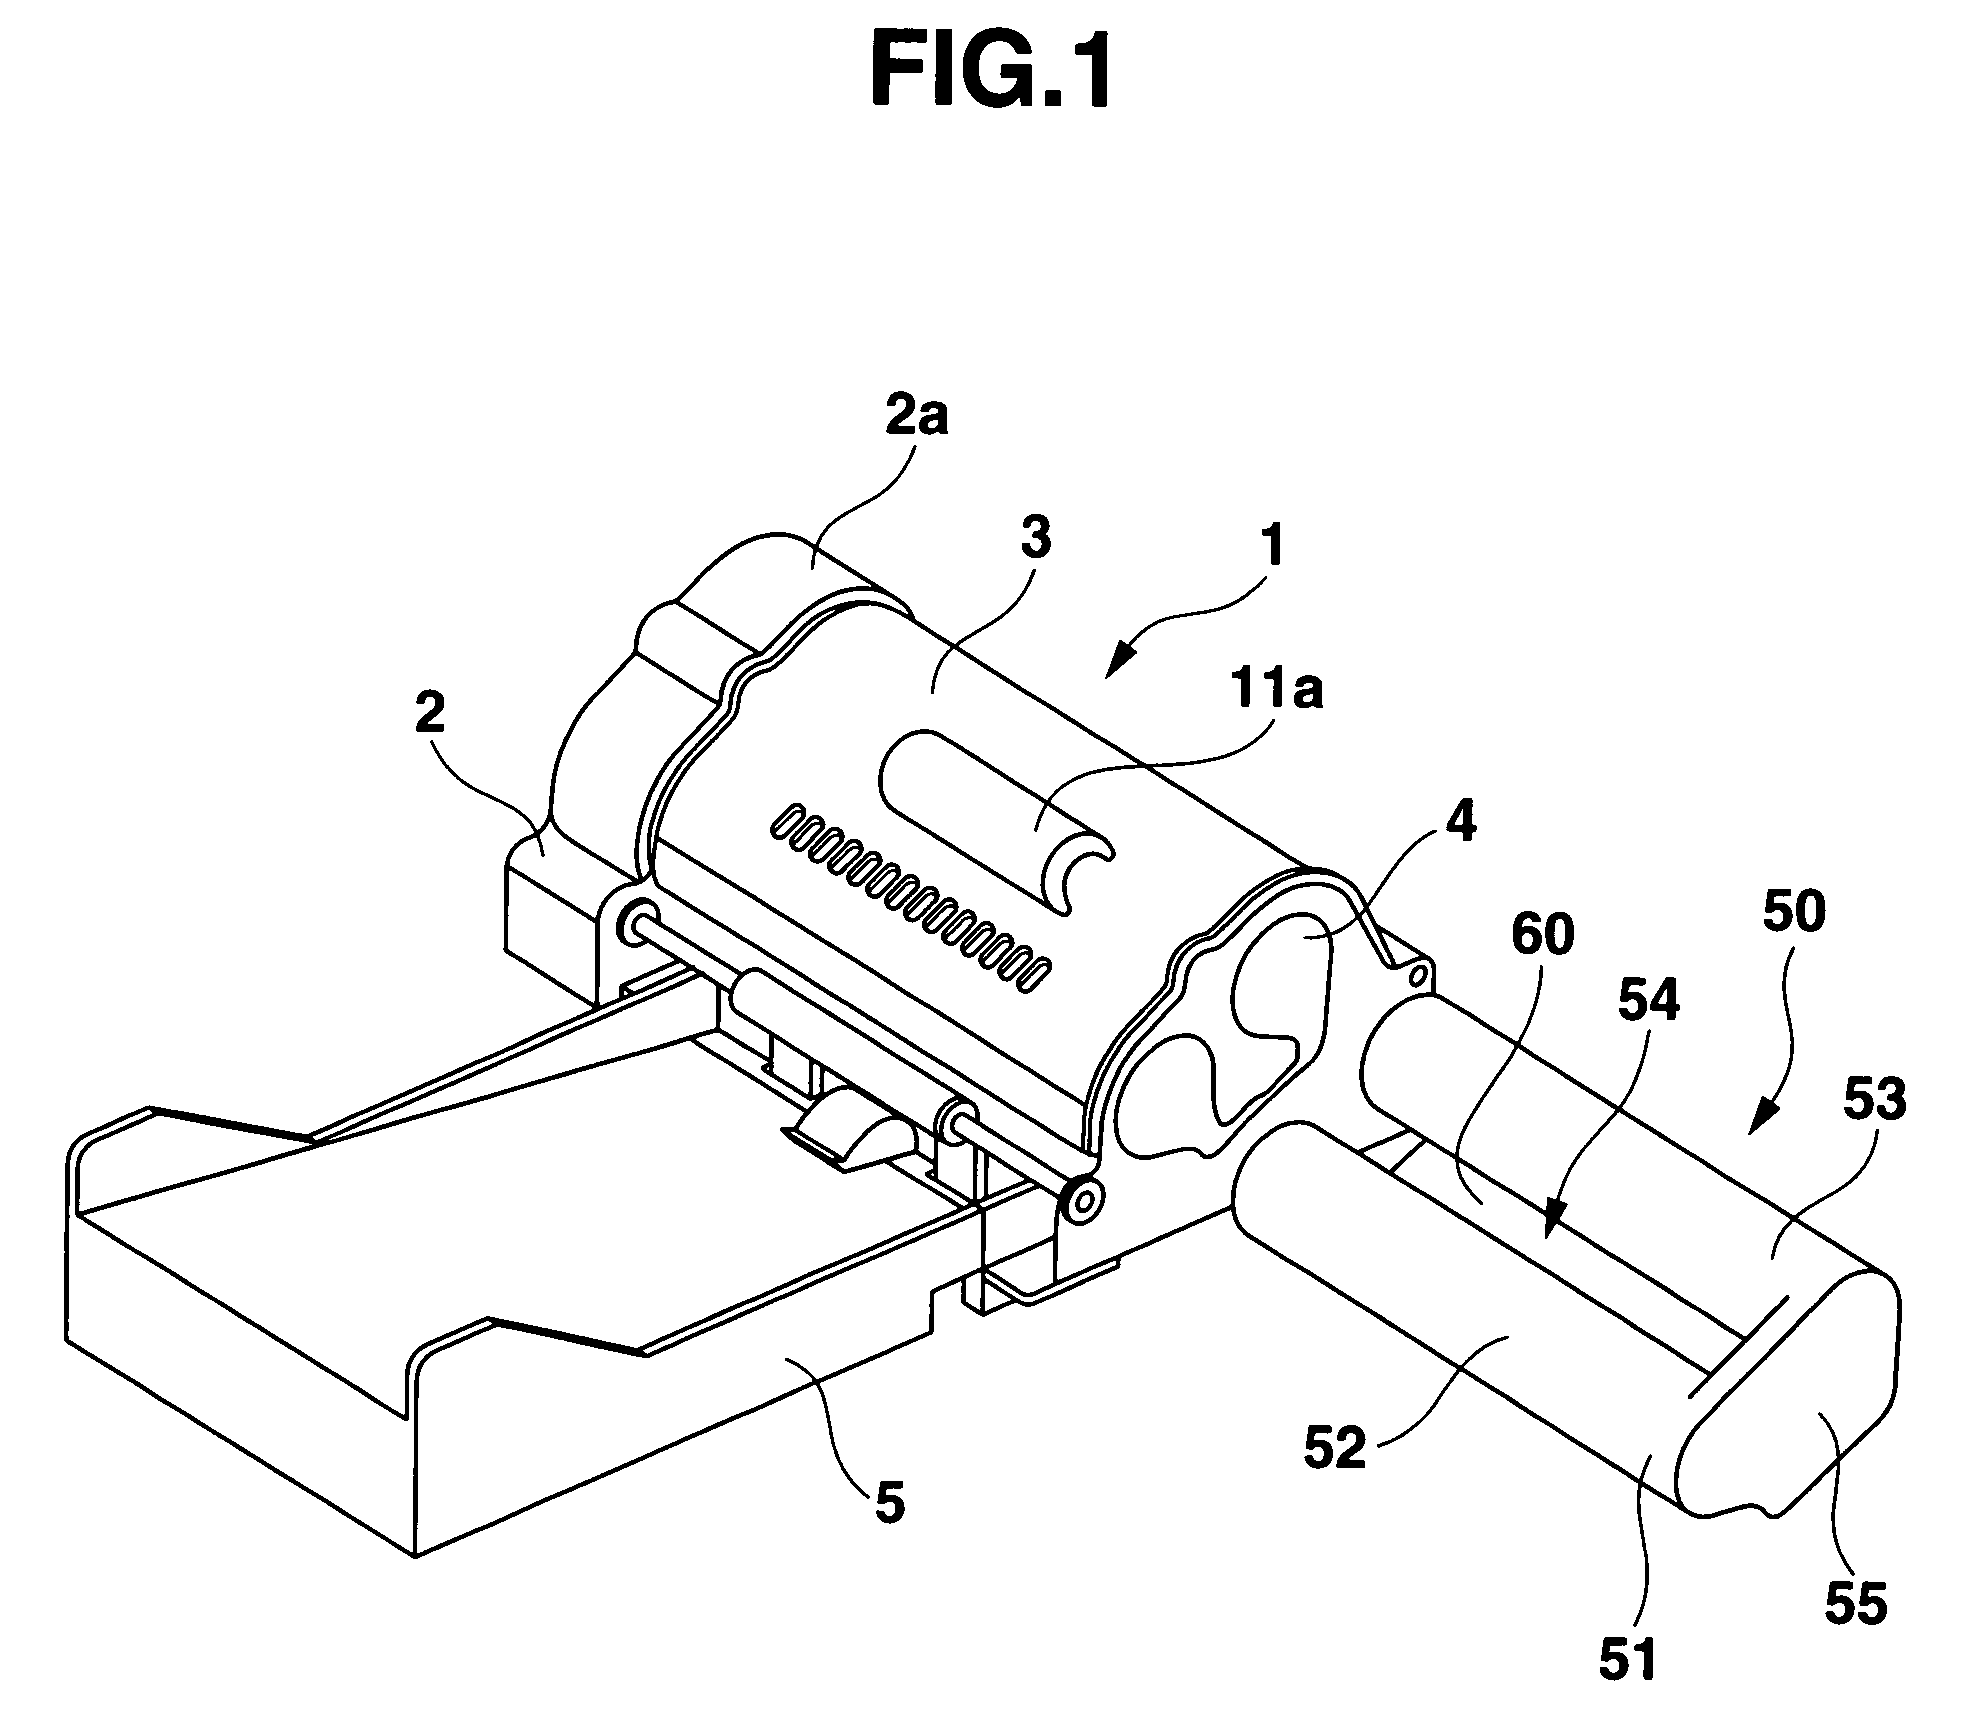 Thermal printer having first and second ring-like conveyance paths